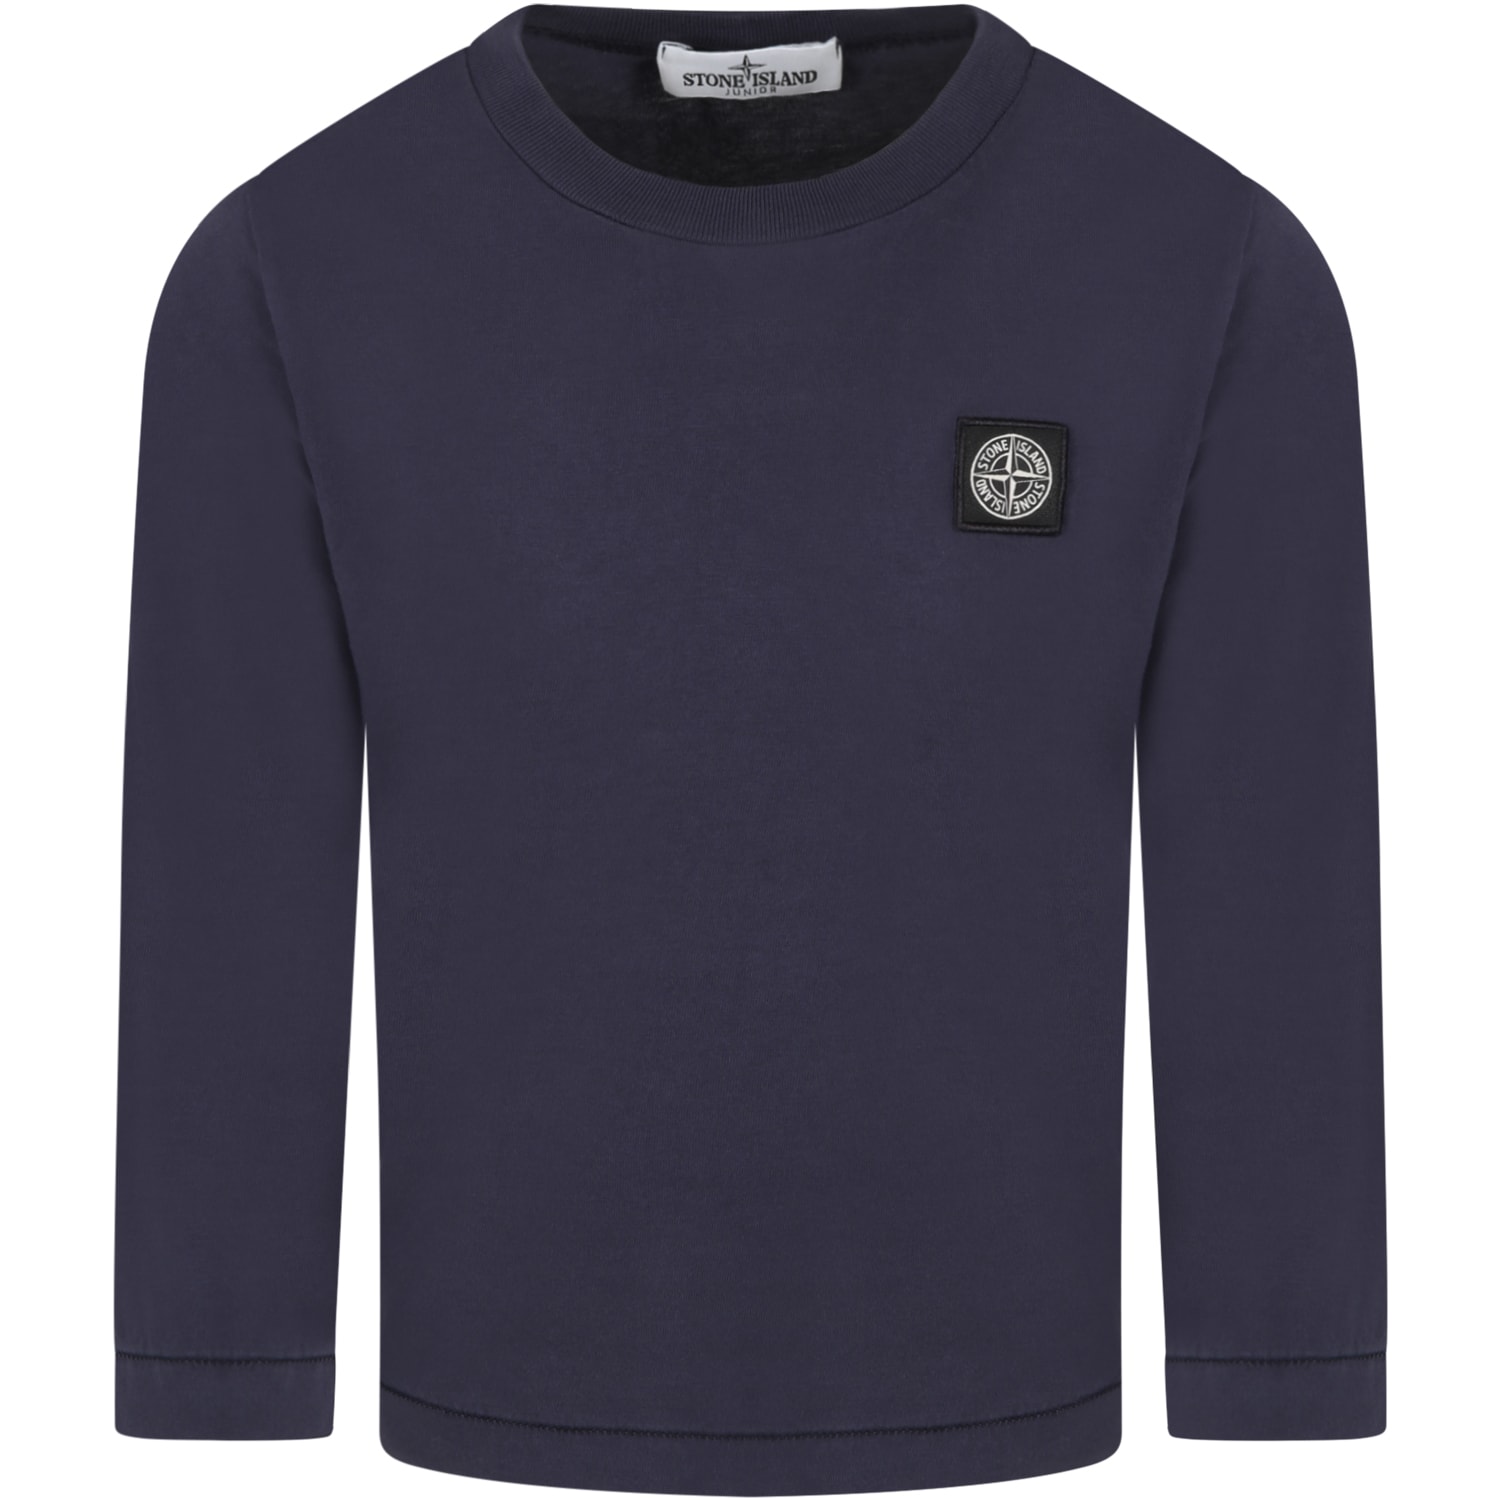 Stone Island Junior Blue T-shirt For Boy With Iconic Compass